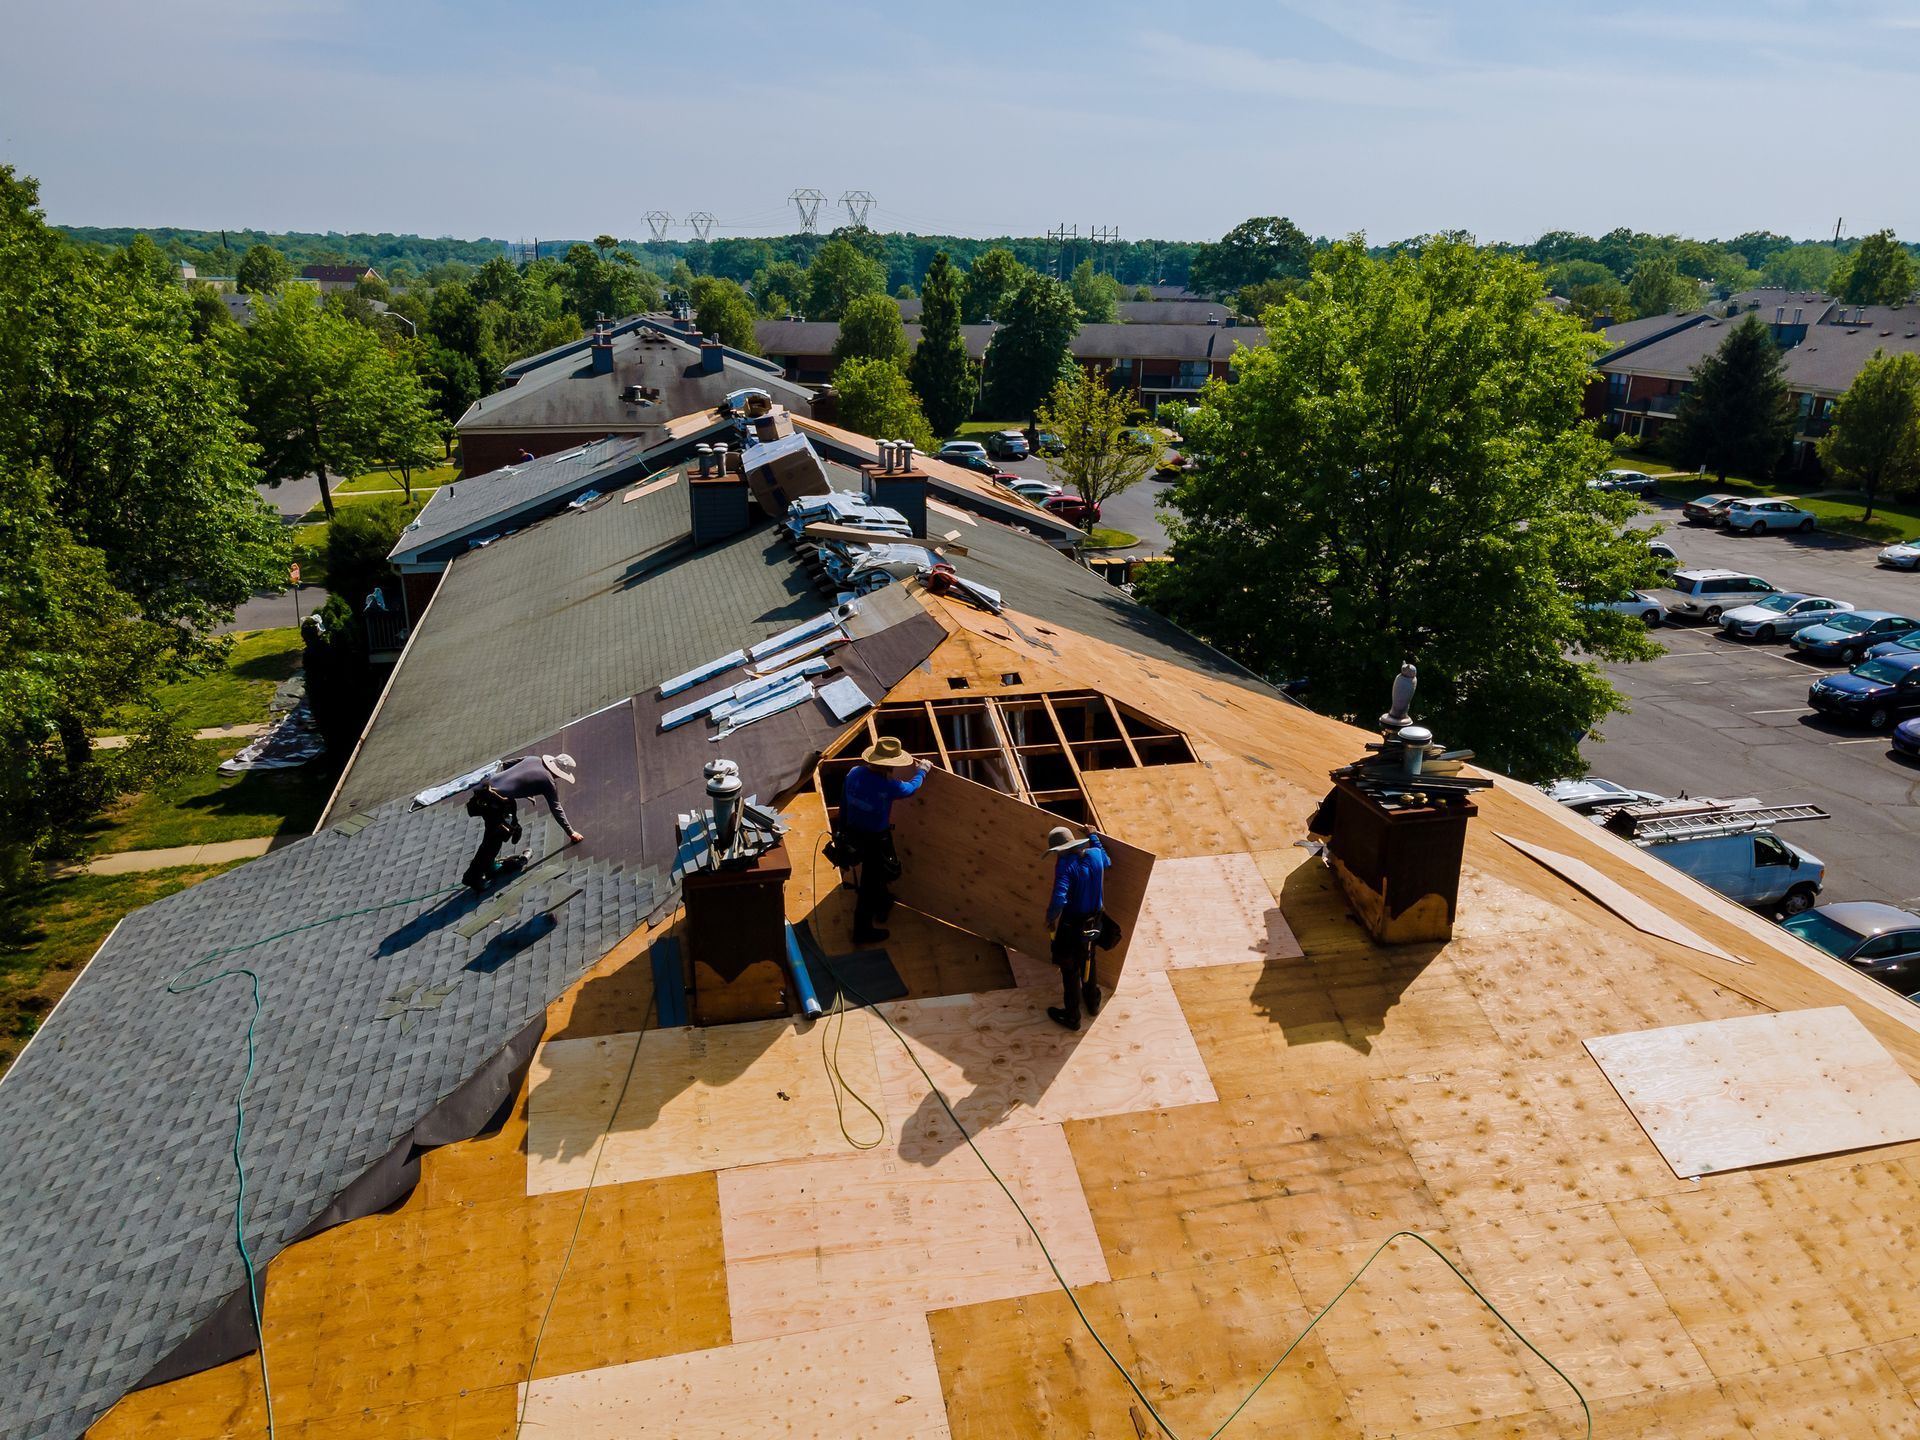 A group of people are working on a roof in a residential area.